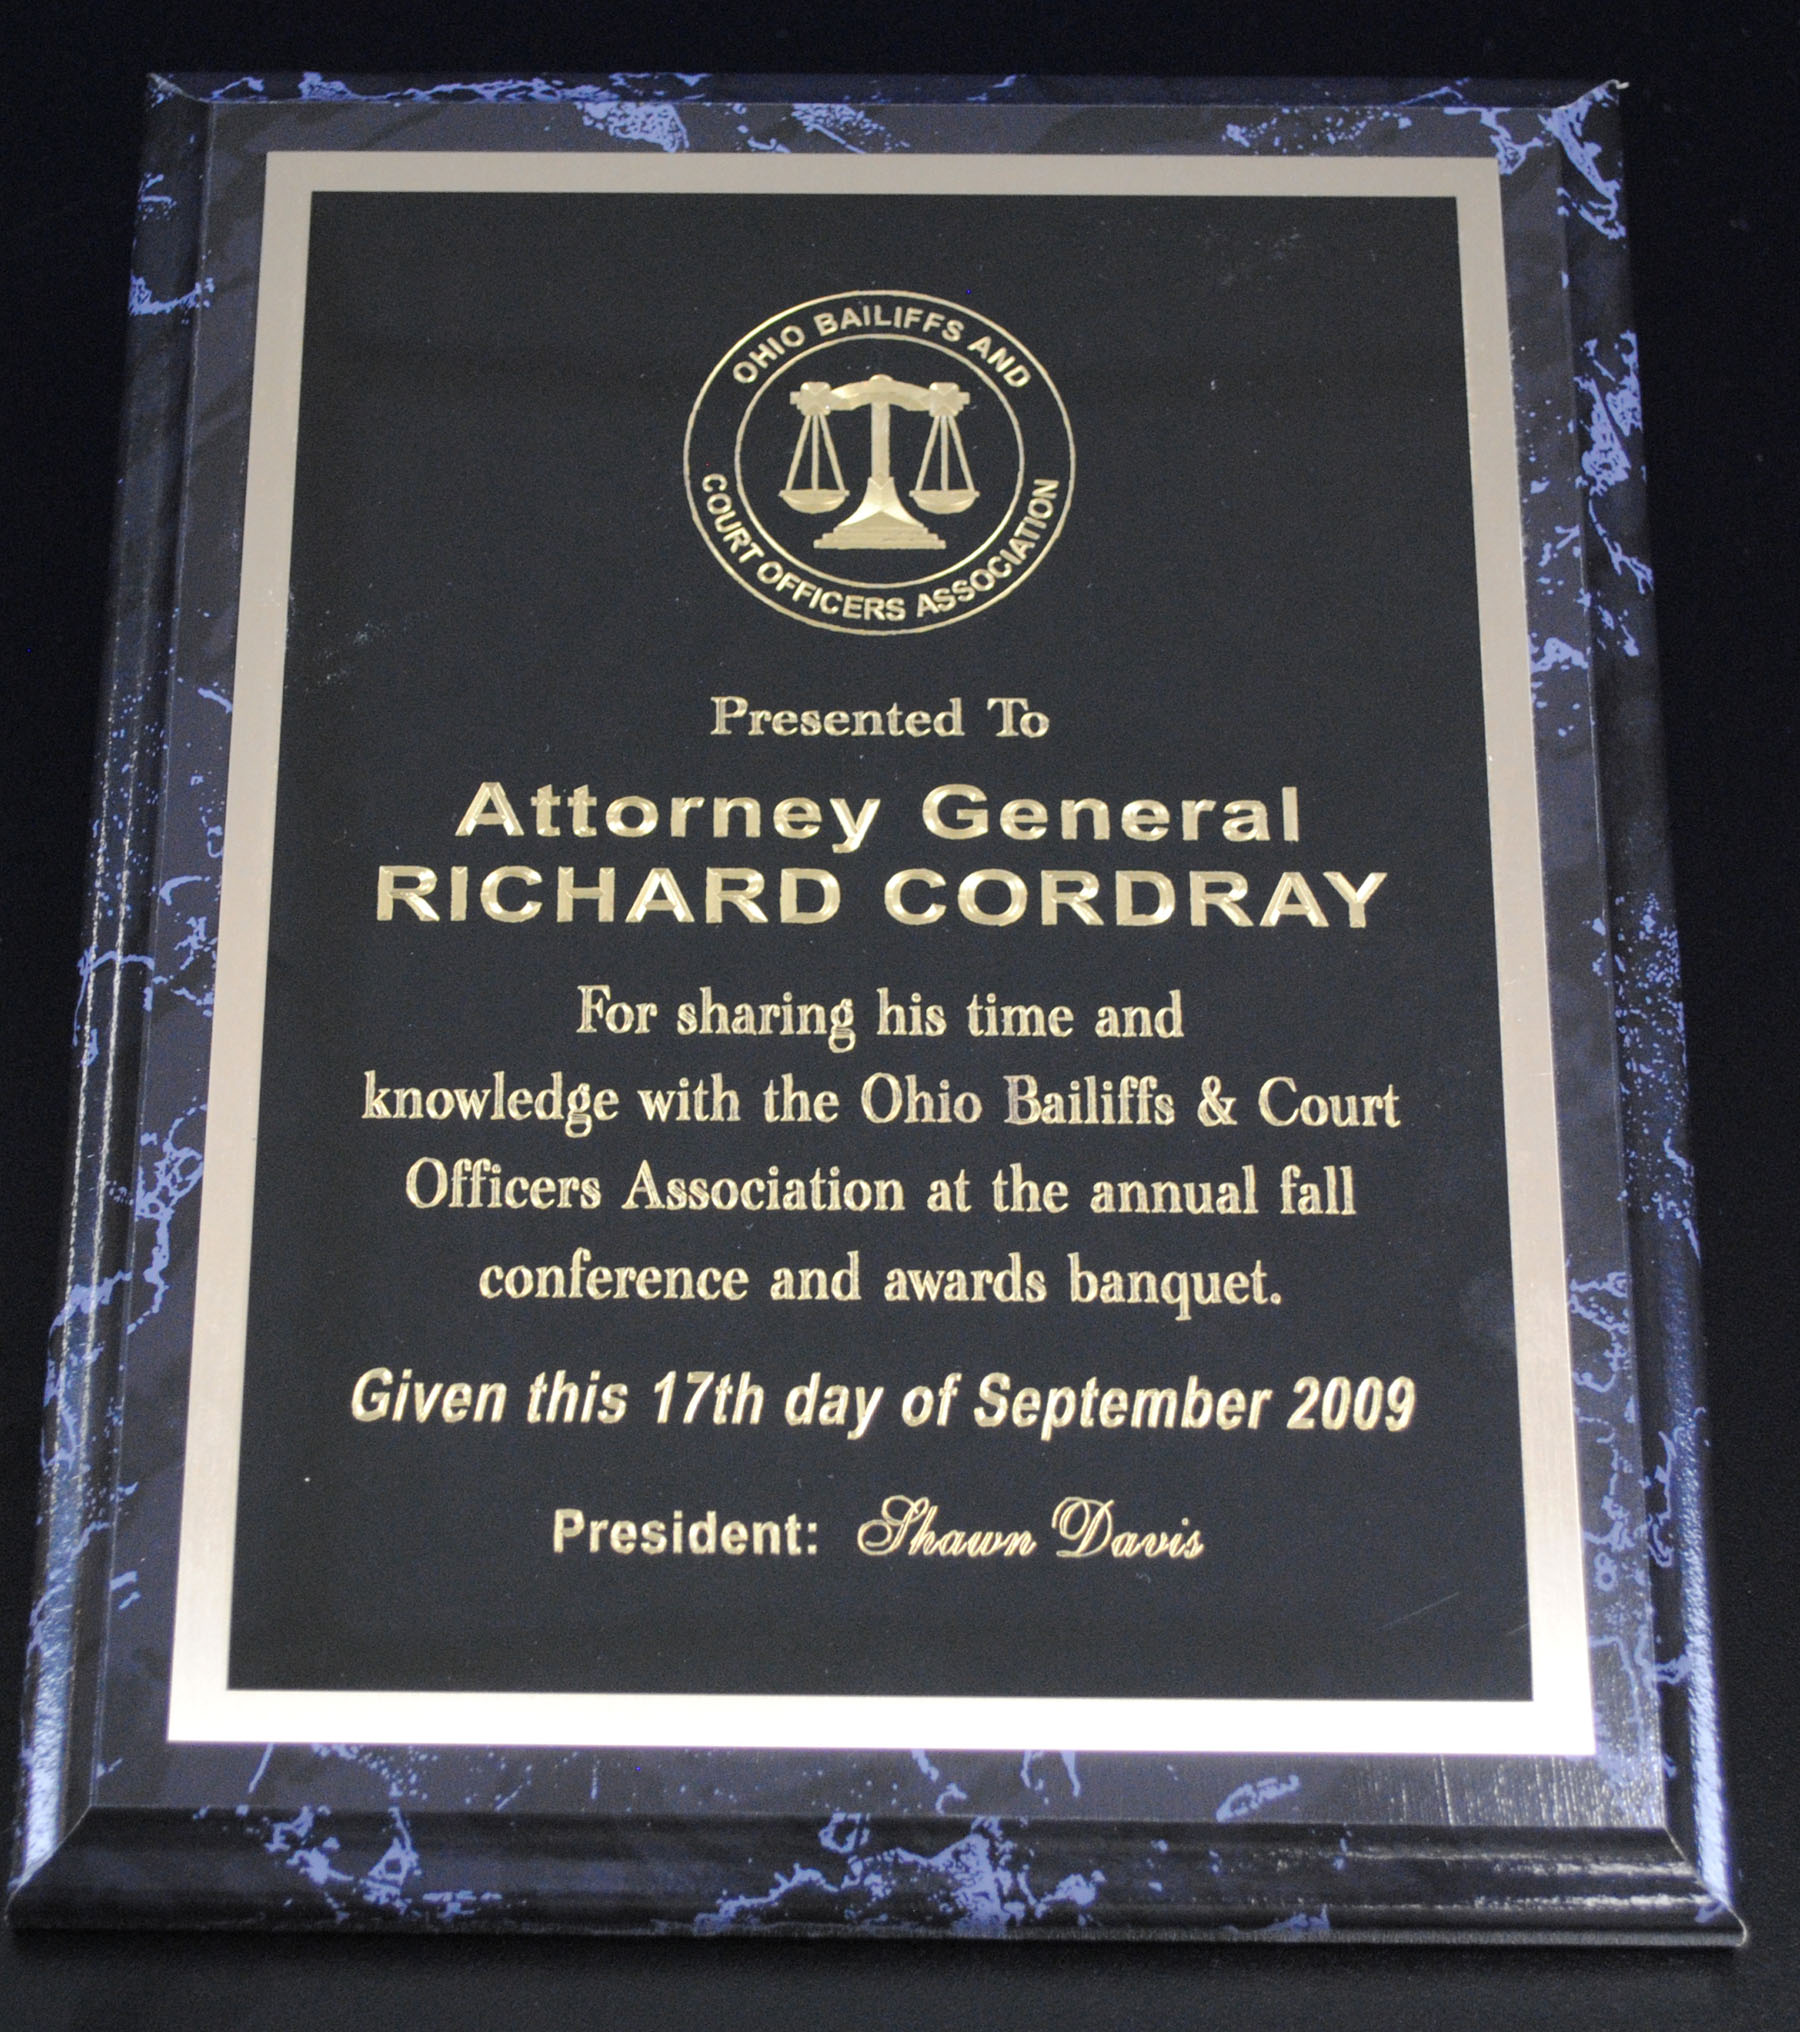 Attorney General Richard Cordray's Plaque of Appreciation from the Ohio Bailiffs & Court Officers As